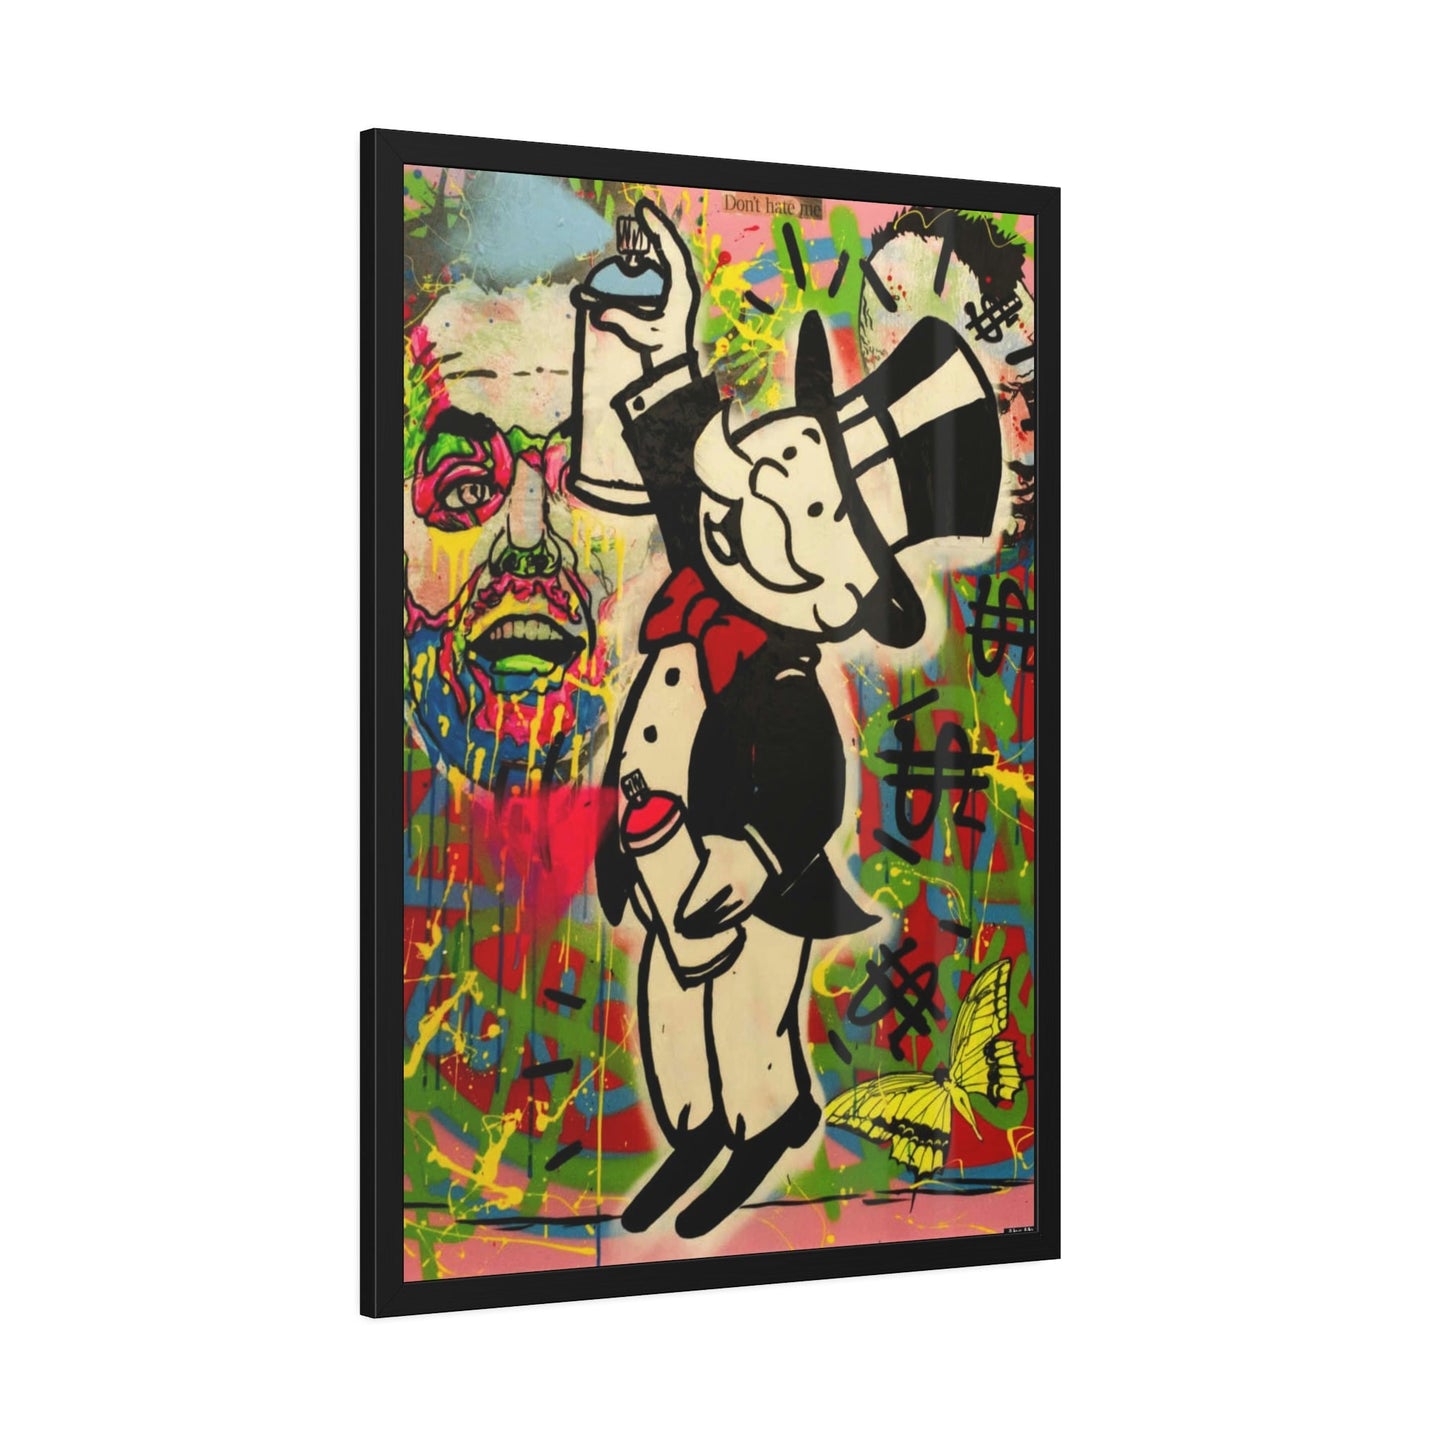 Urban Art that Inspires: Alec Monopoly's Wall Art and Poster Collection